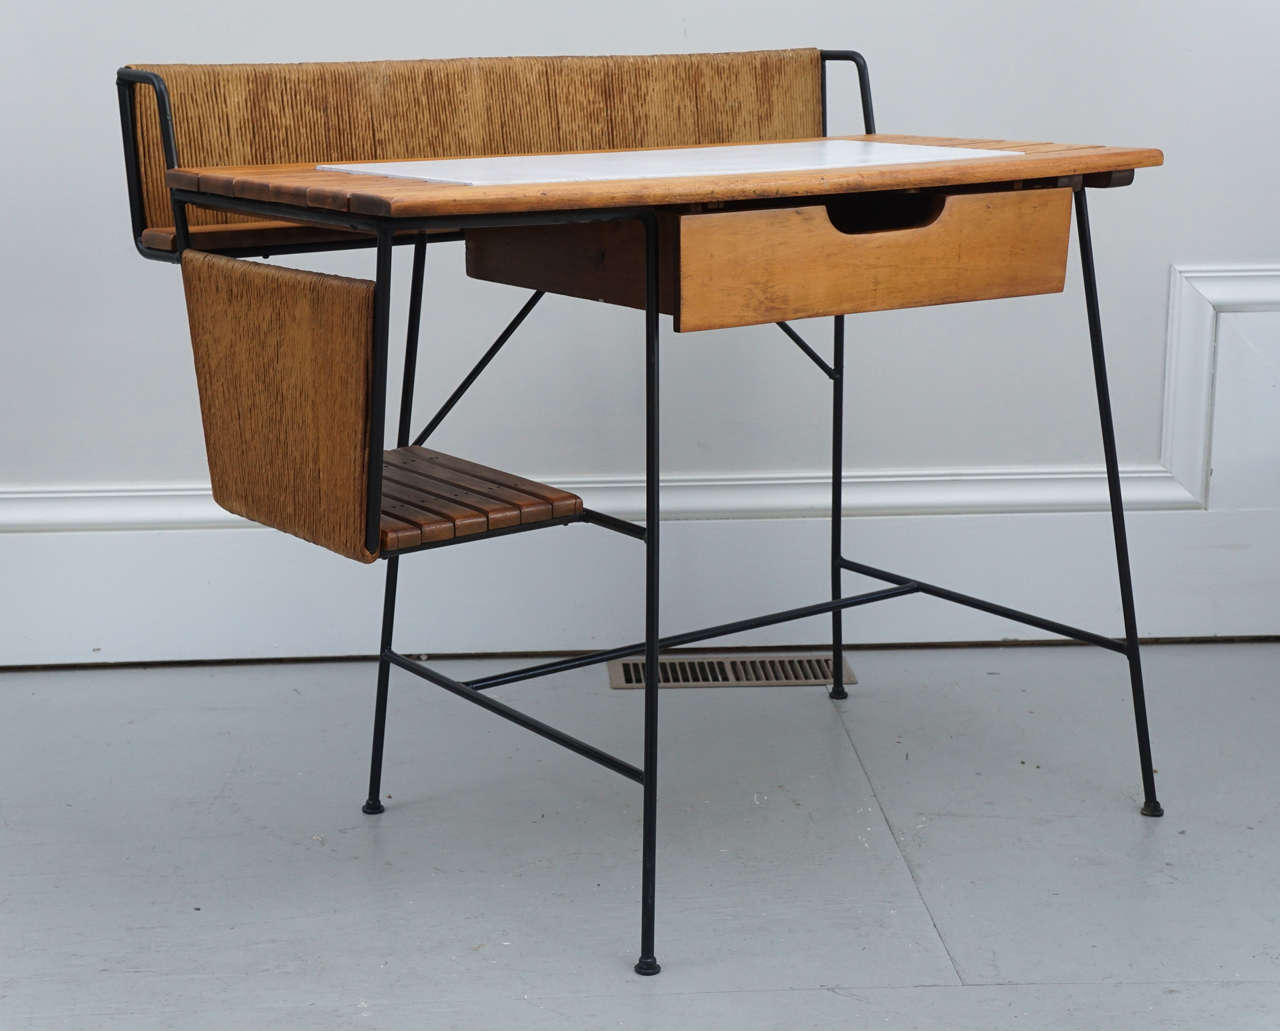 A great desk from the 50's designed by Arthur Umanoff.